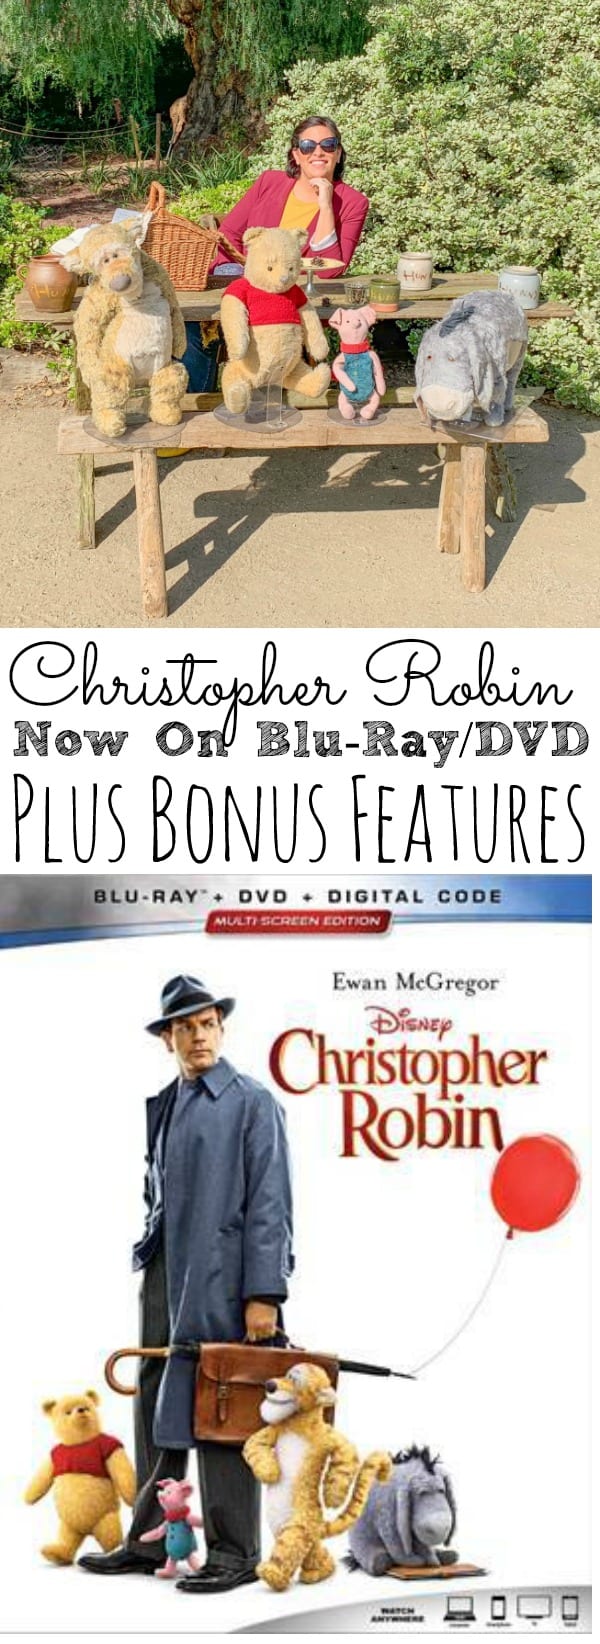 Christopher Robin On Blu-ray and Bonus Features